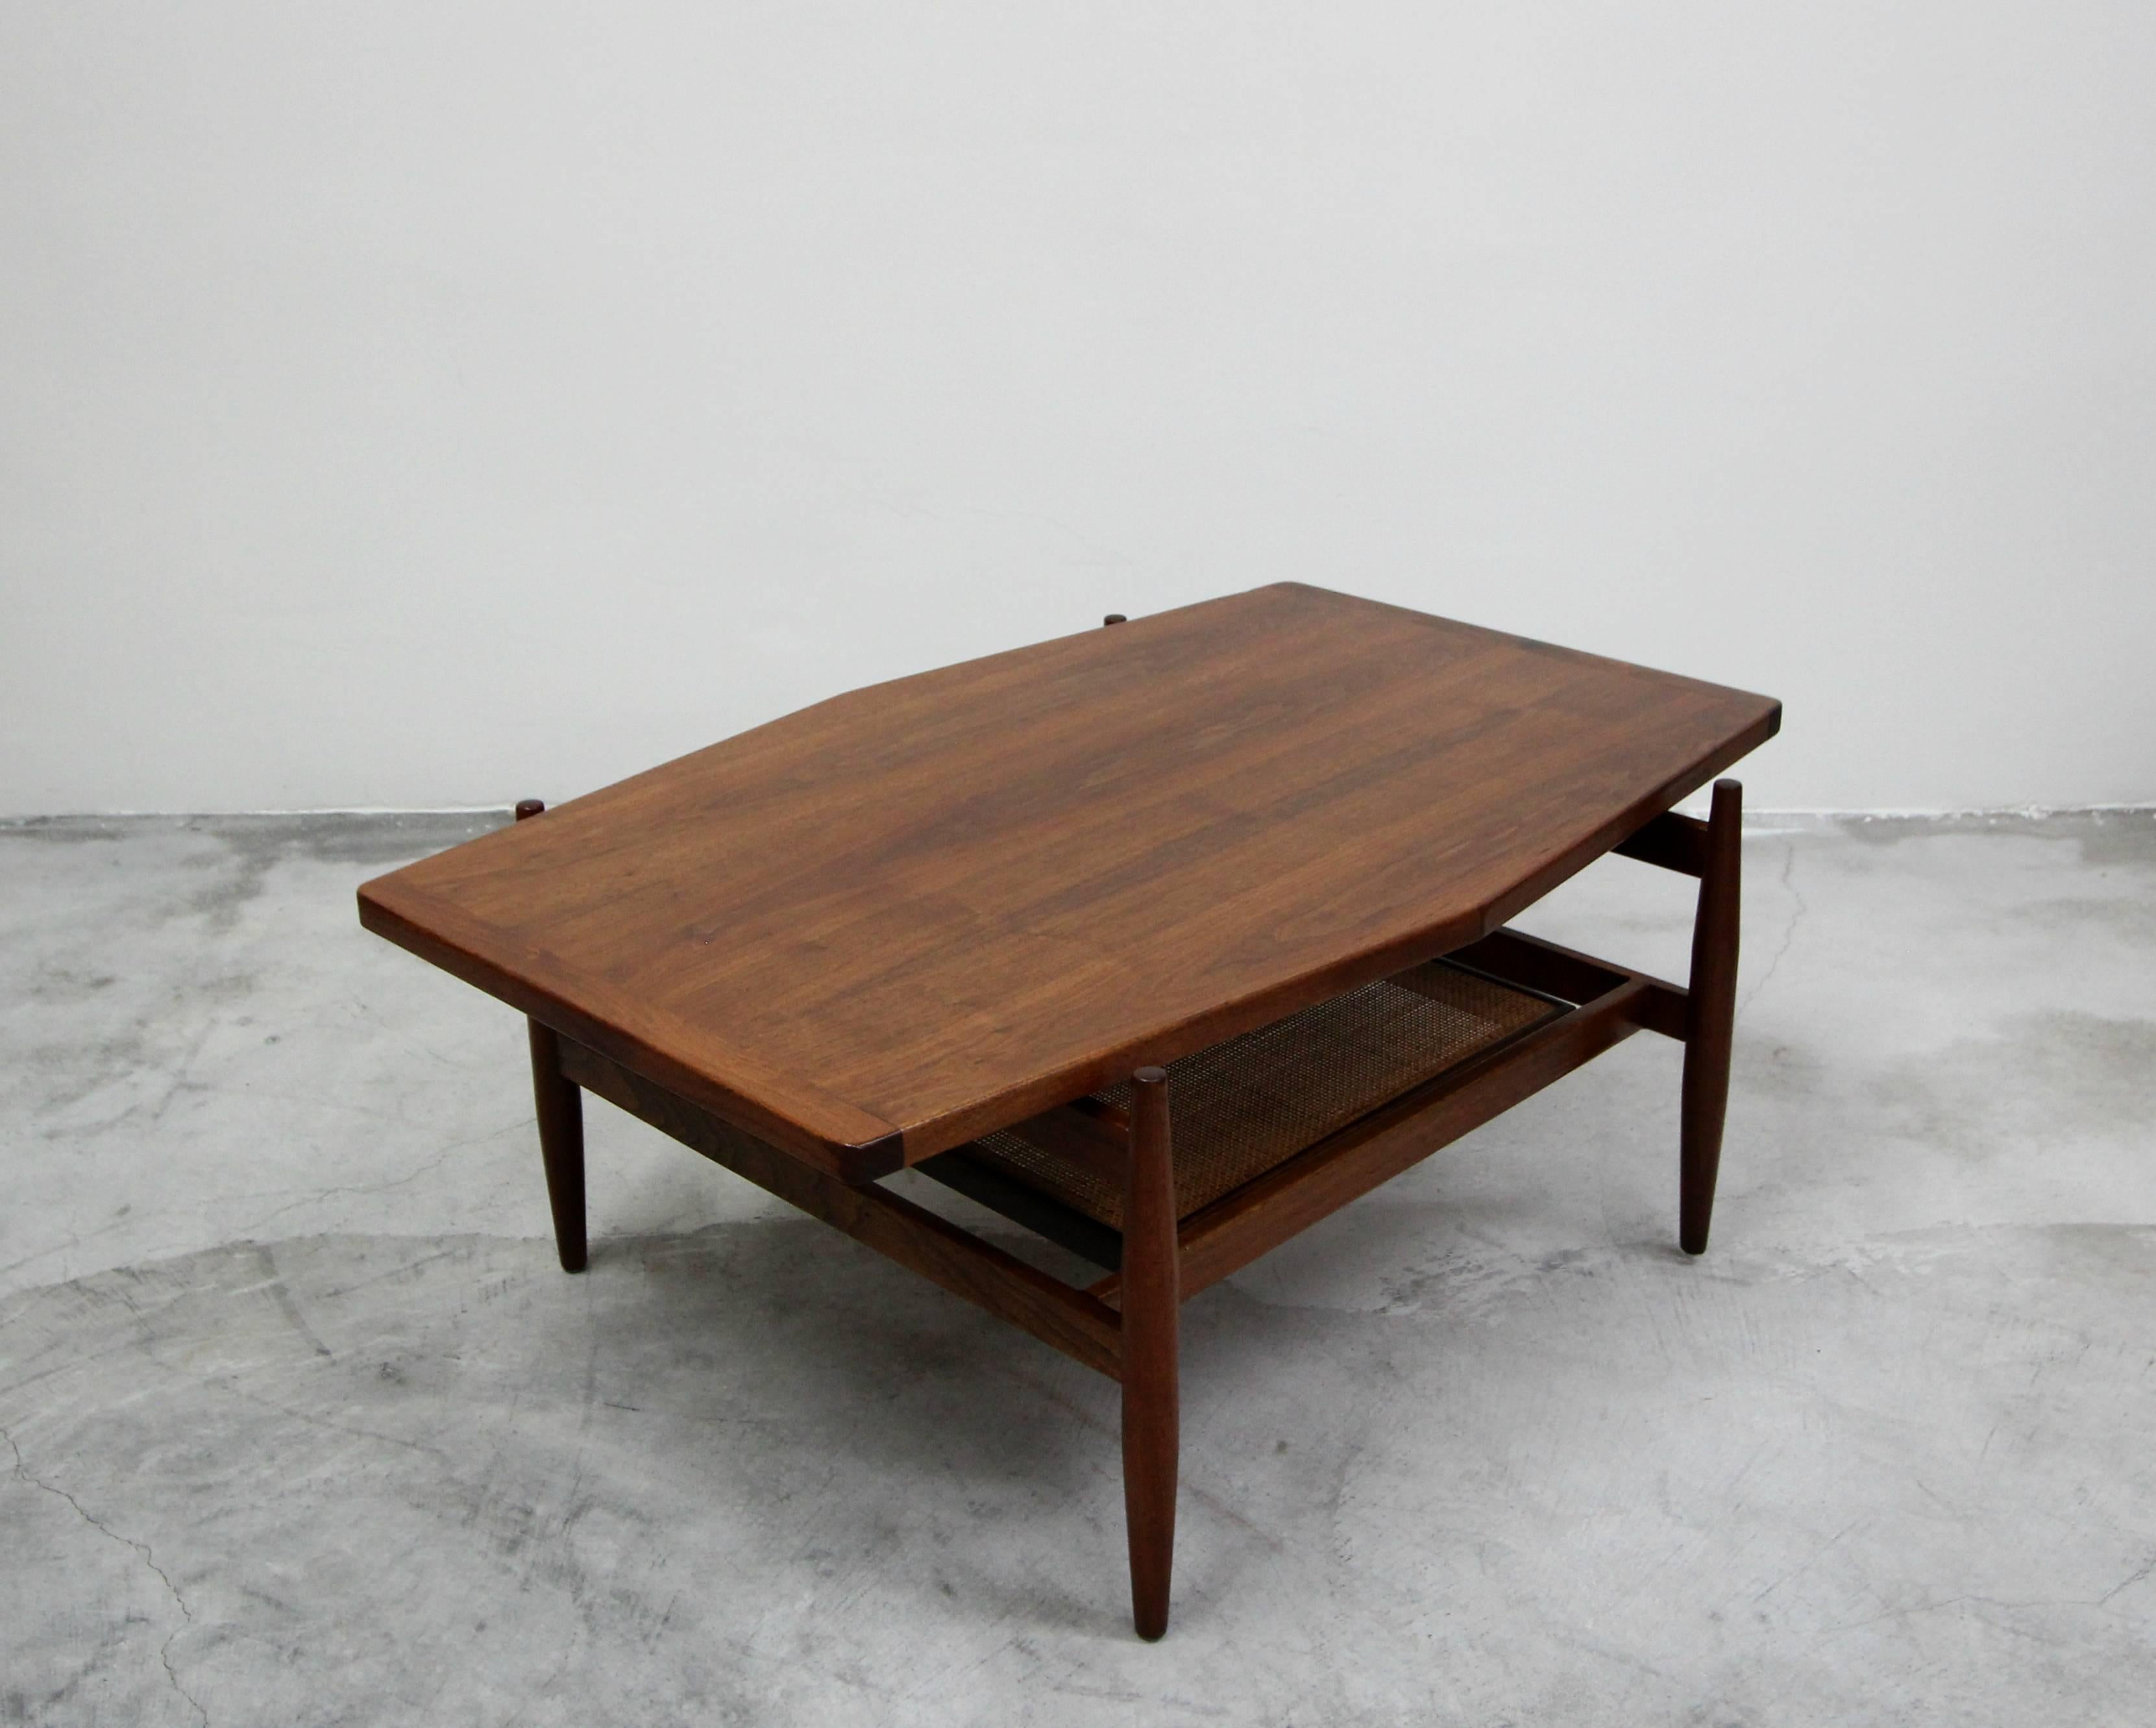 Beautiful hexagonal walnut and cane coffee table by Jens Risom. Simple midcentury design at it's finest. All original and in perfect condition.